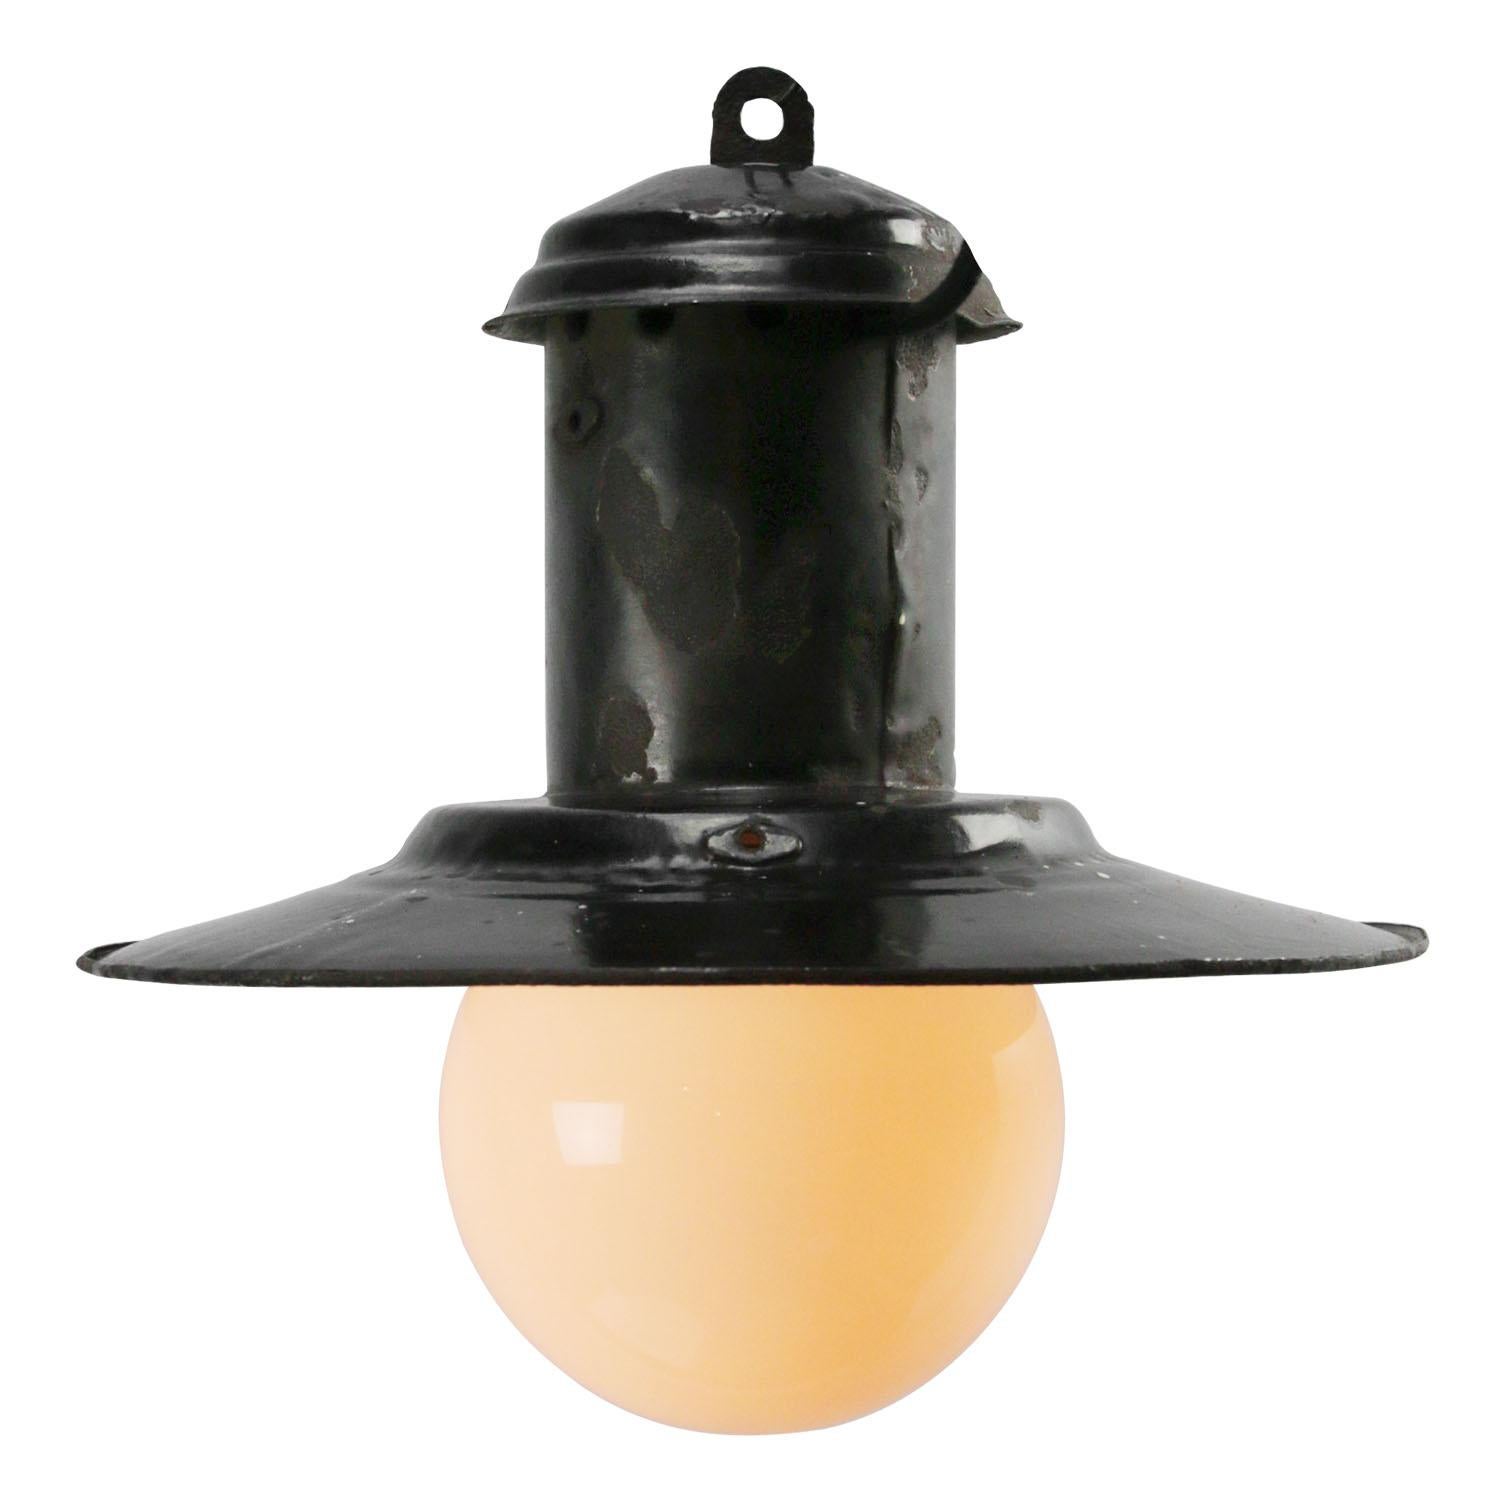 Black enamel factory pendant
White inside. White opaline glass

Measures: diameter glass 15 cm

Weight 1.30 kg / 2.9 lb

Priced per individual item. All lamps have been made suitable by international standards for incandescent light bulbs,